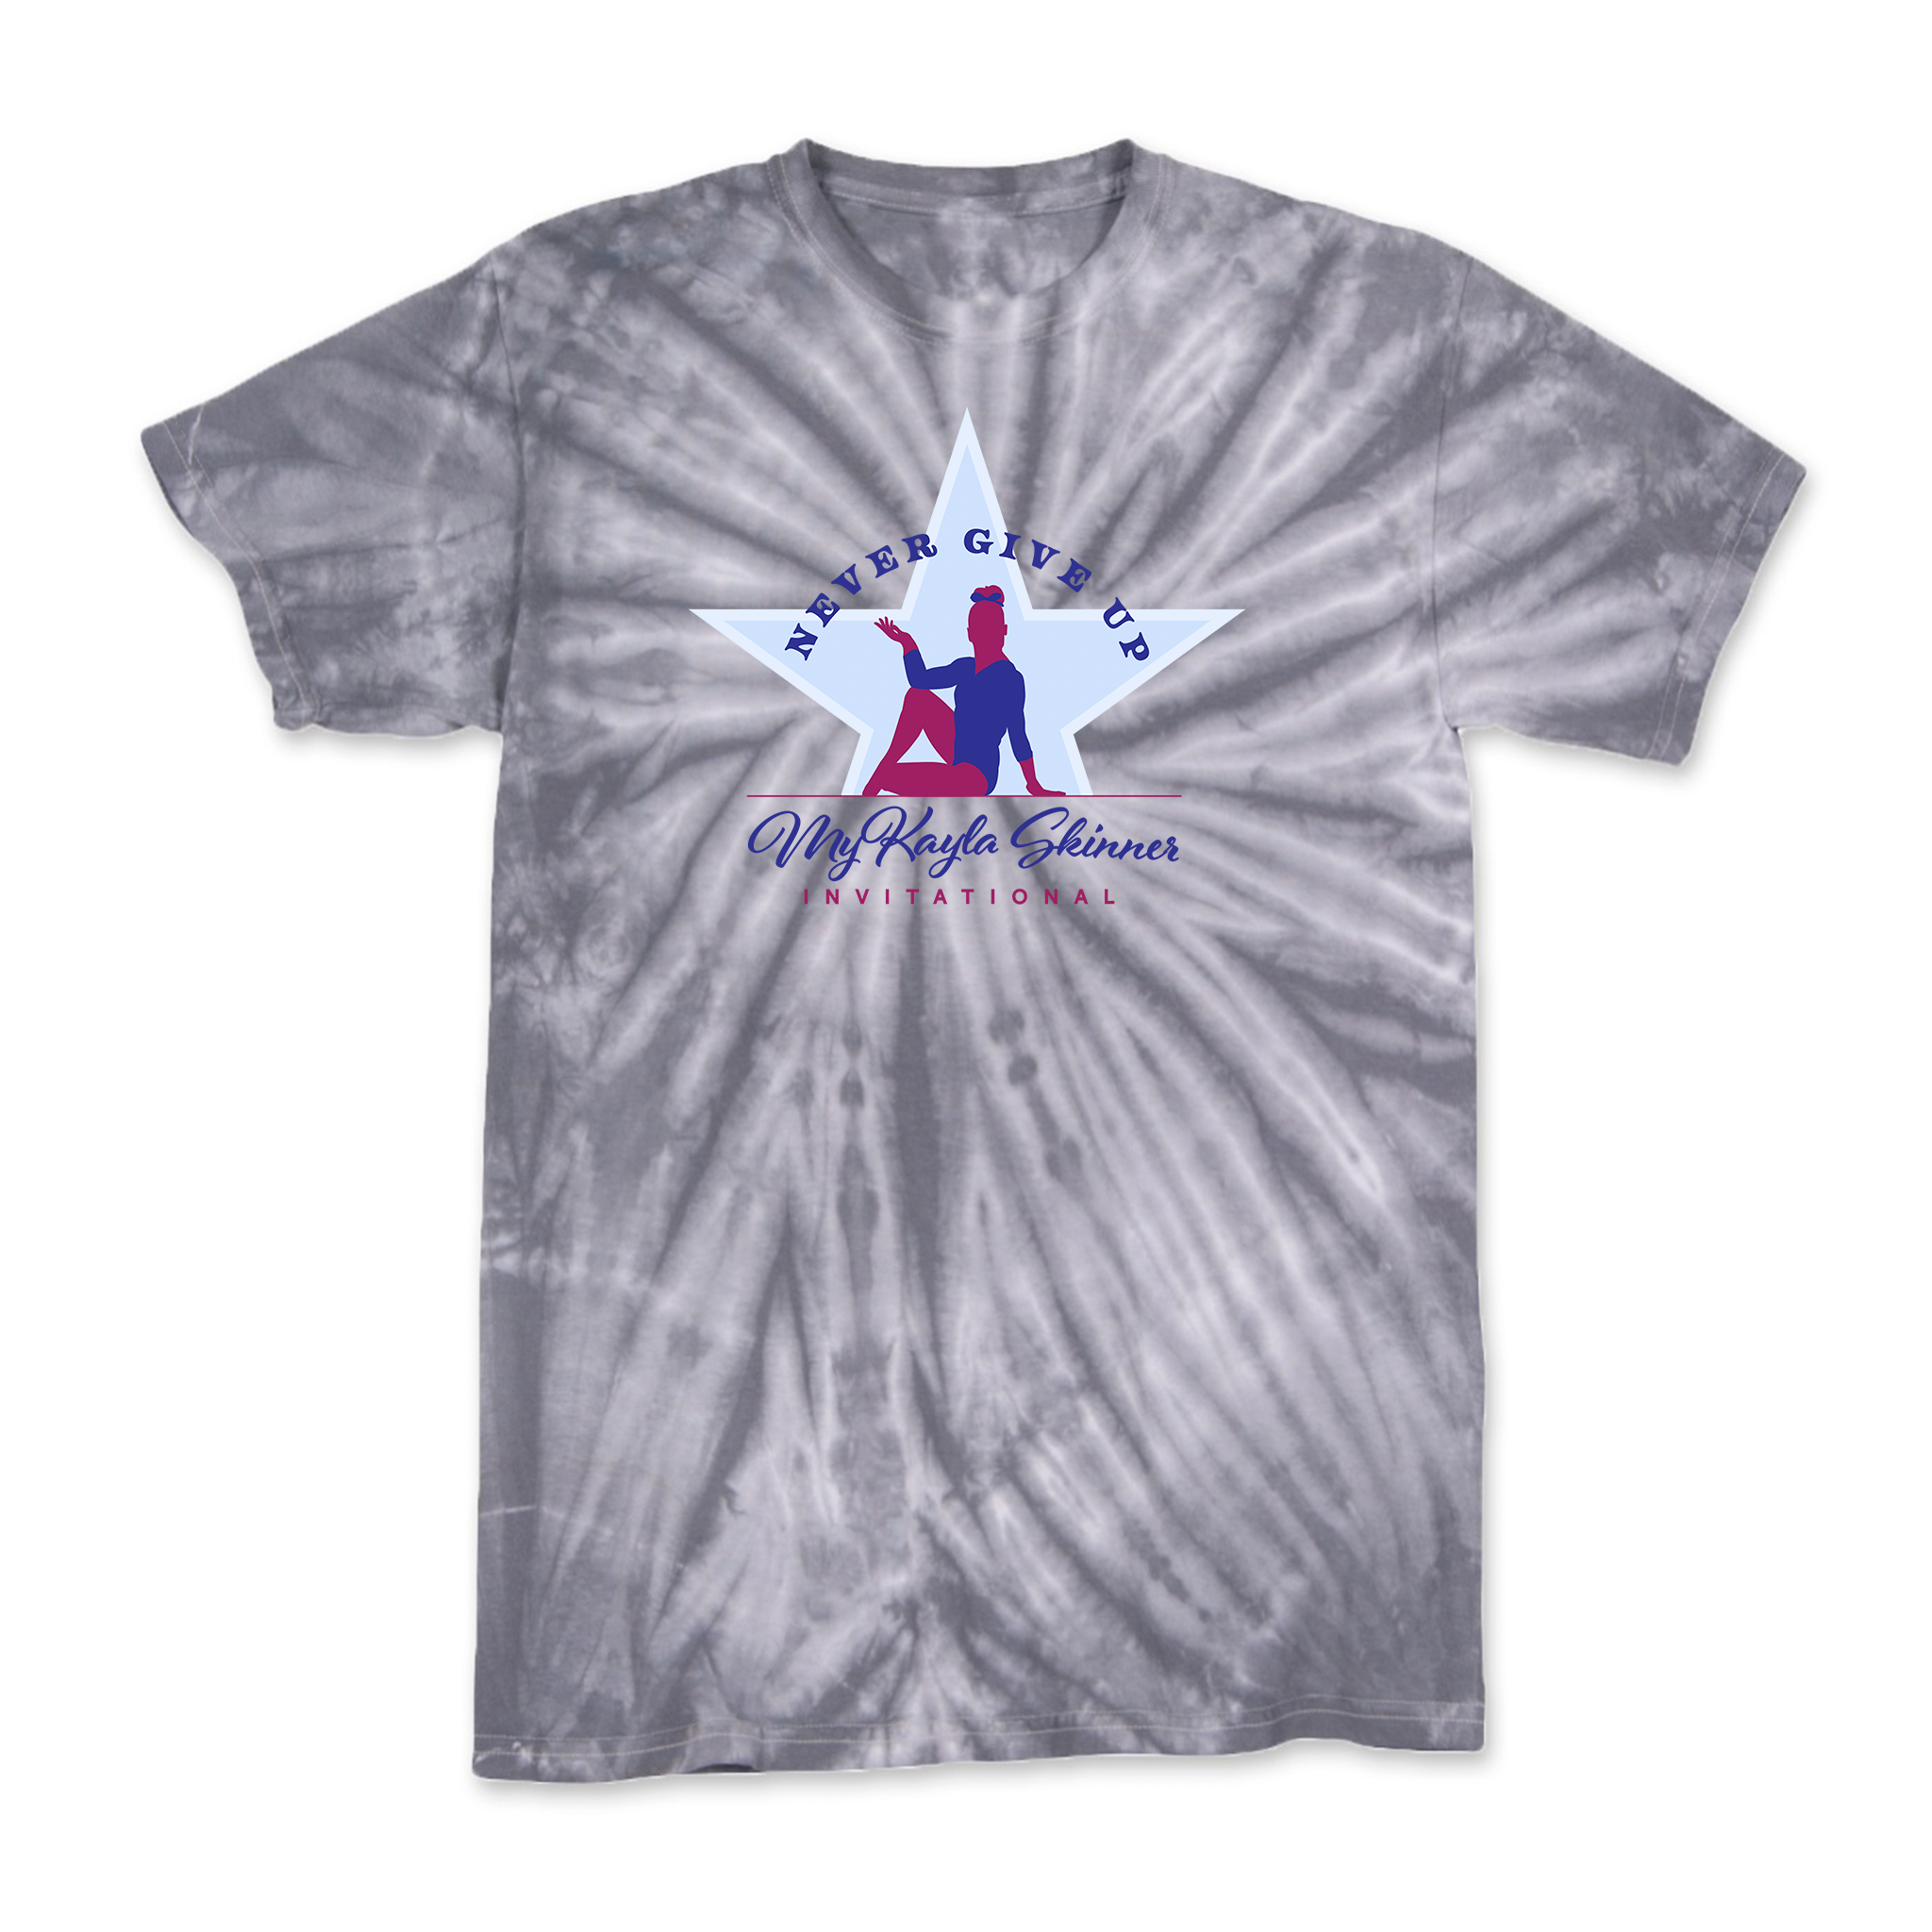 TIE-DYE SHORT SLEEVES - 2023 Never Give Up with MyKayla Skinner